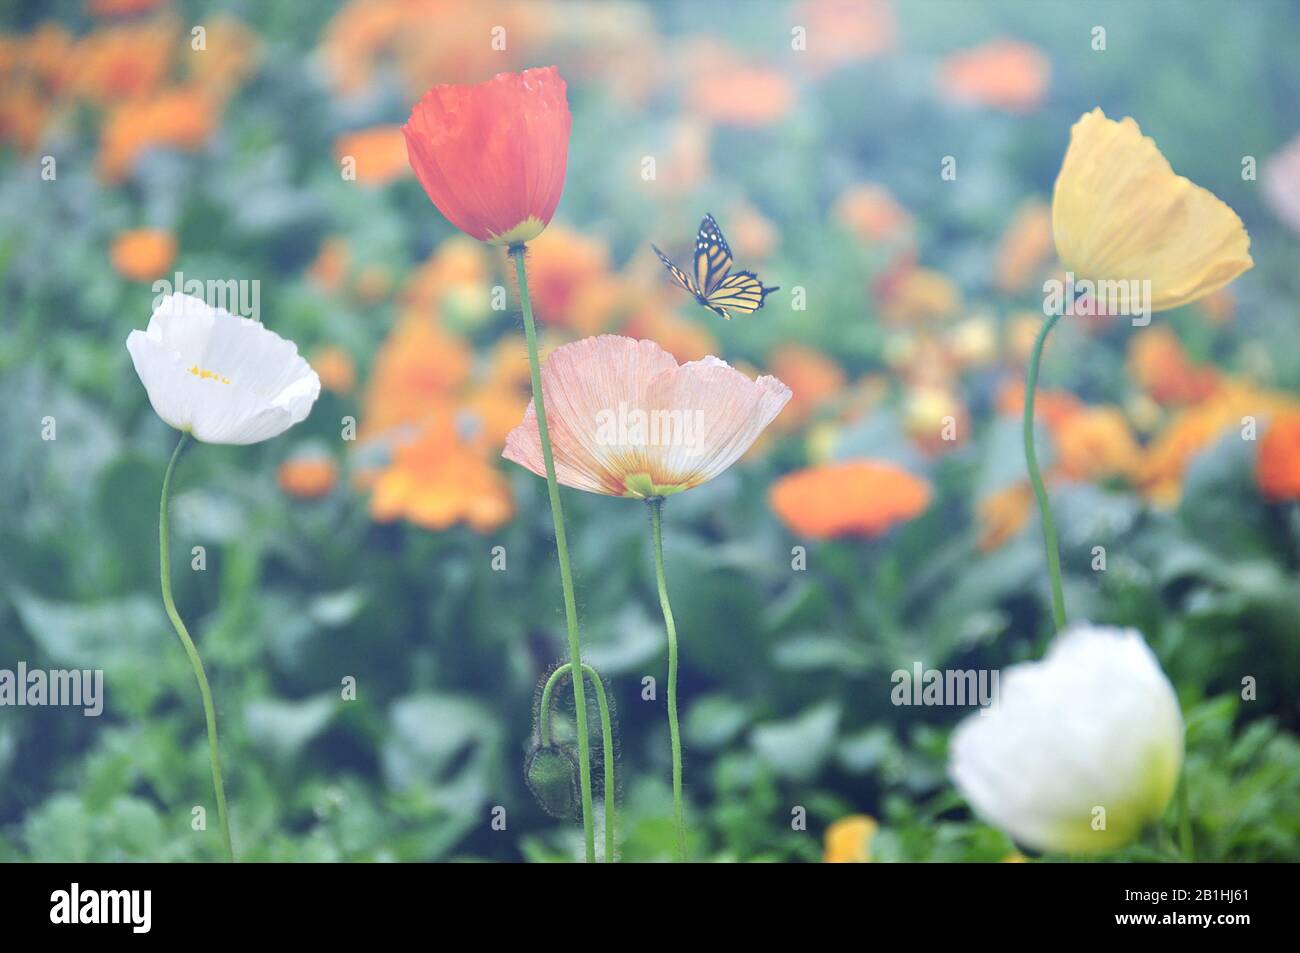 Yellow Butterfly with Colorful Flowers on Colorful Blur Background. Stock Photo